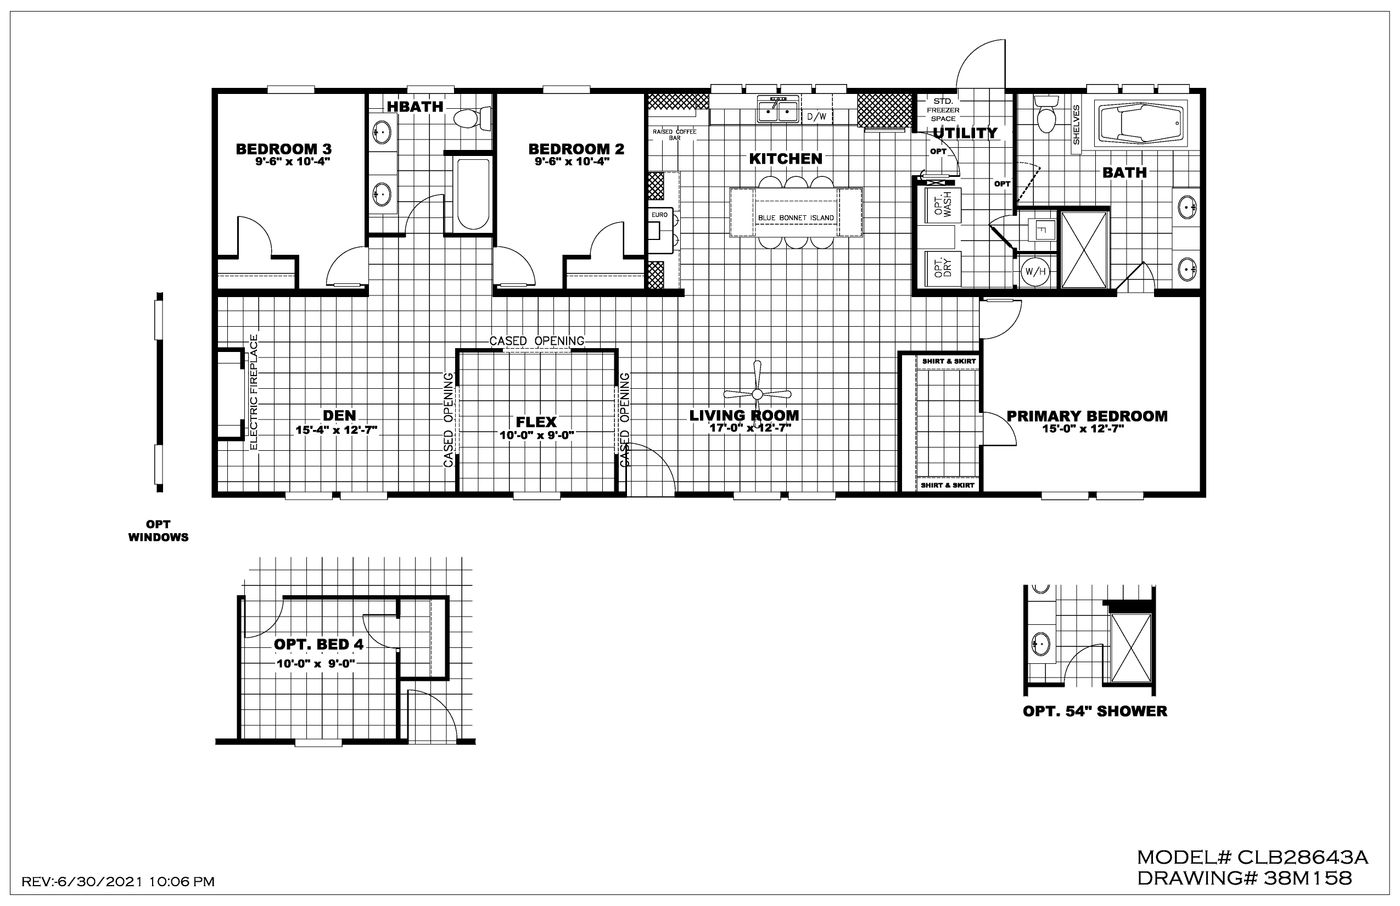 The BLUEBONNET BREEZE Floor Plan. This Manufactured Mobile Home features 3 bedrooms and 2 baths.